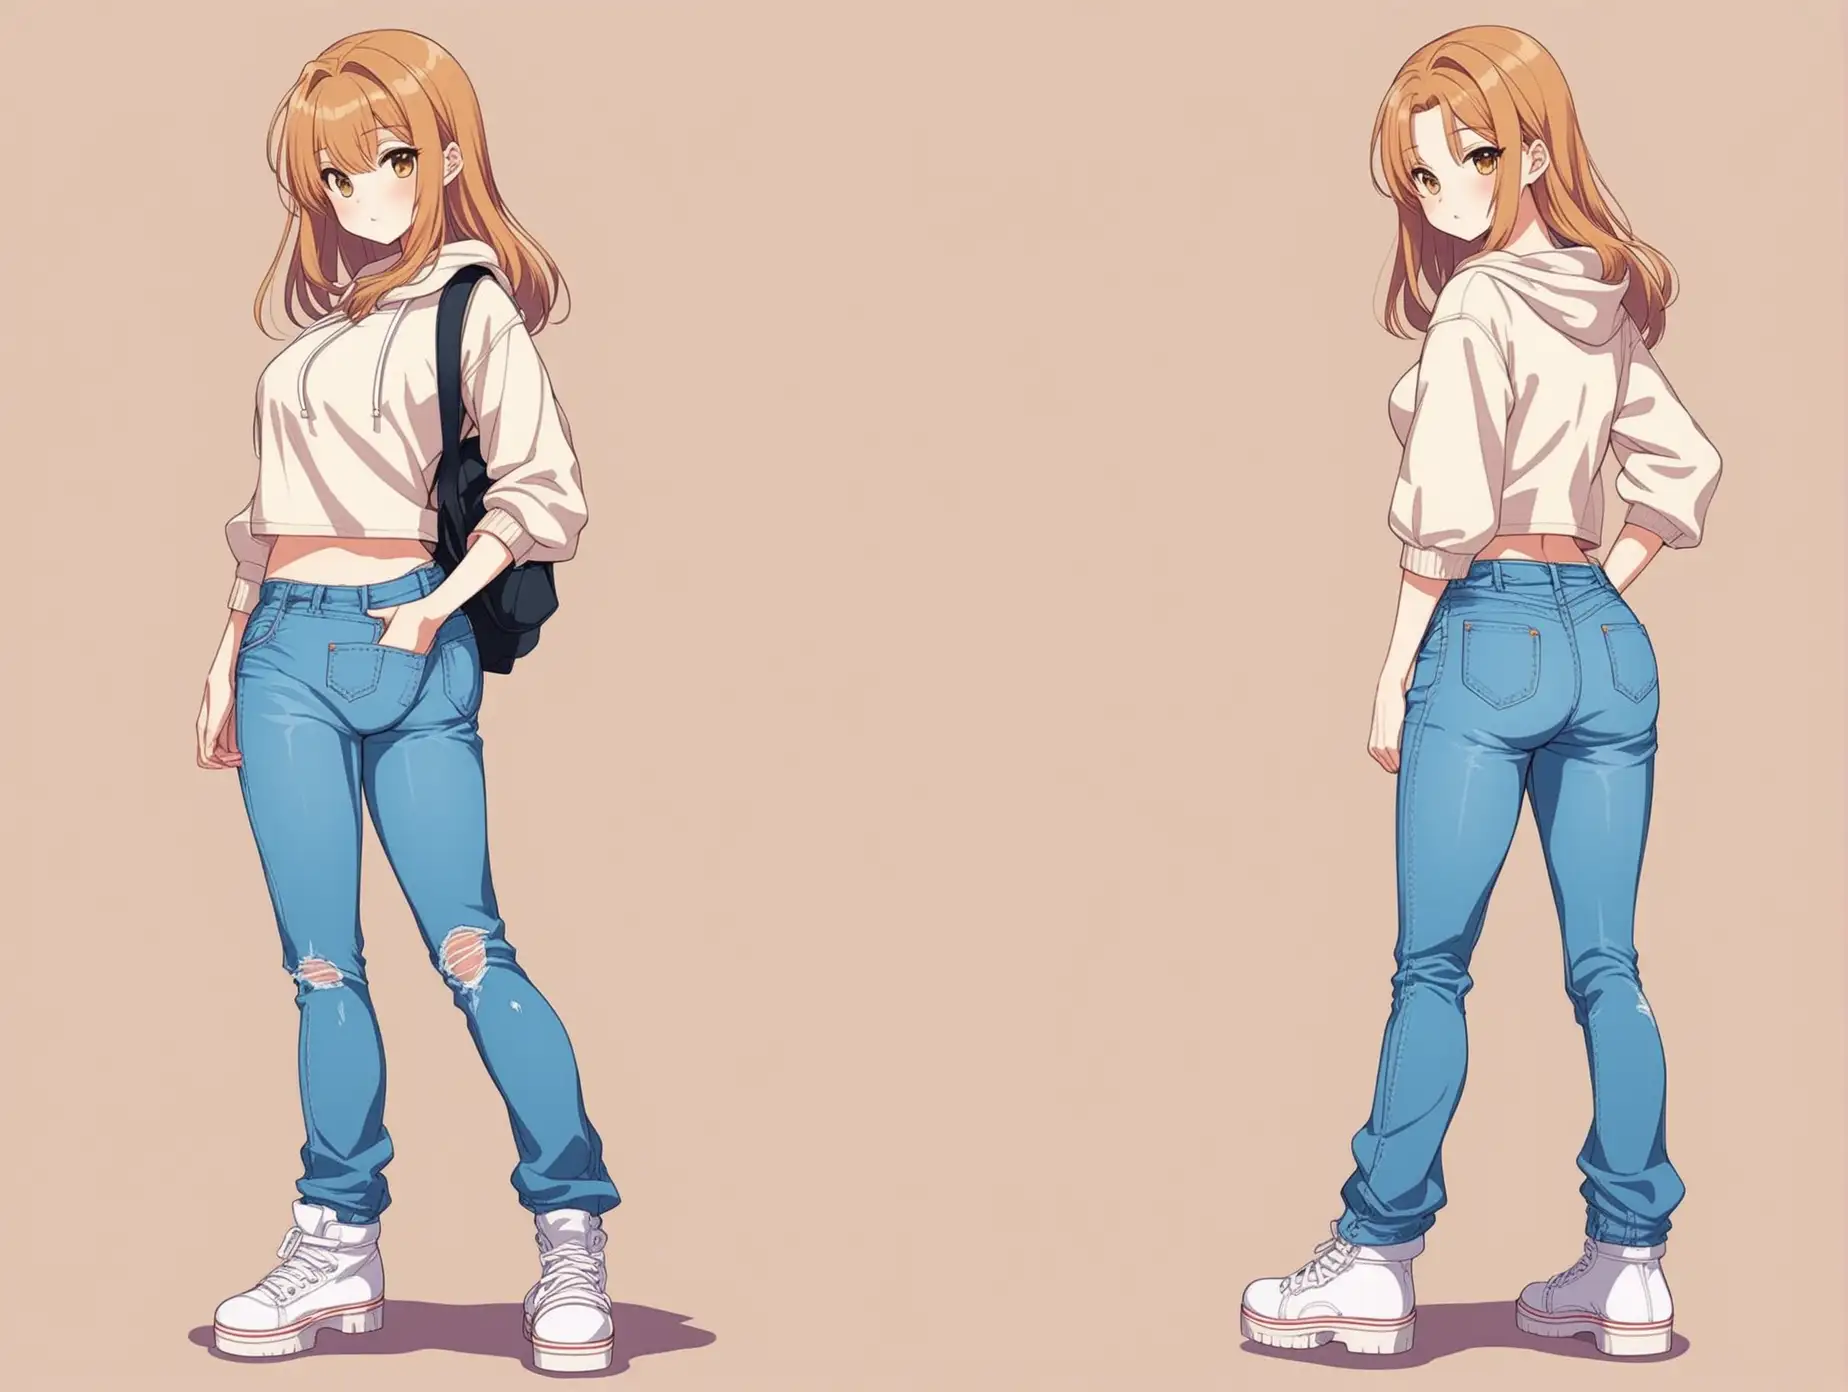 Sensual-Anime-Girl-in-Vintage-Sneakers-and-Jeans